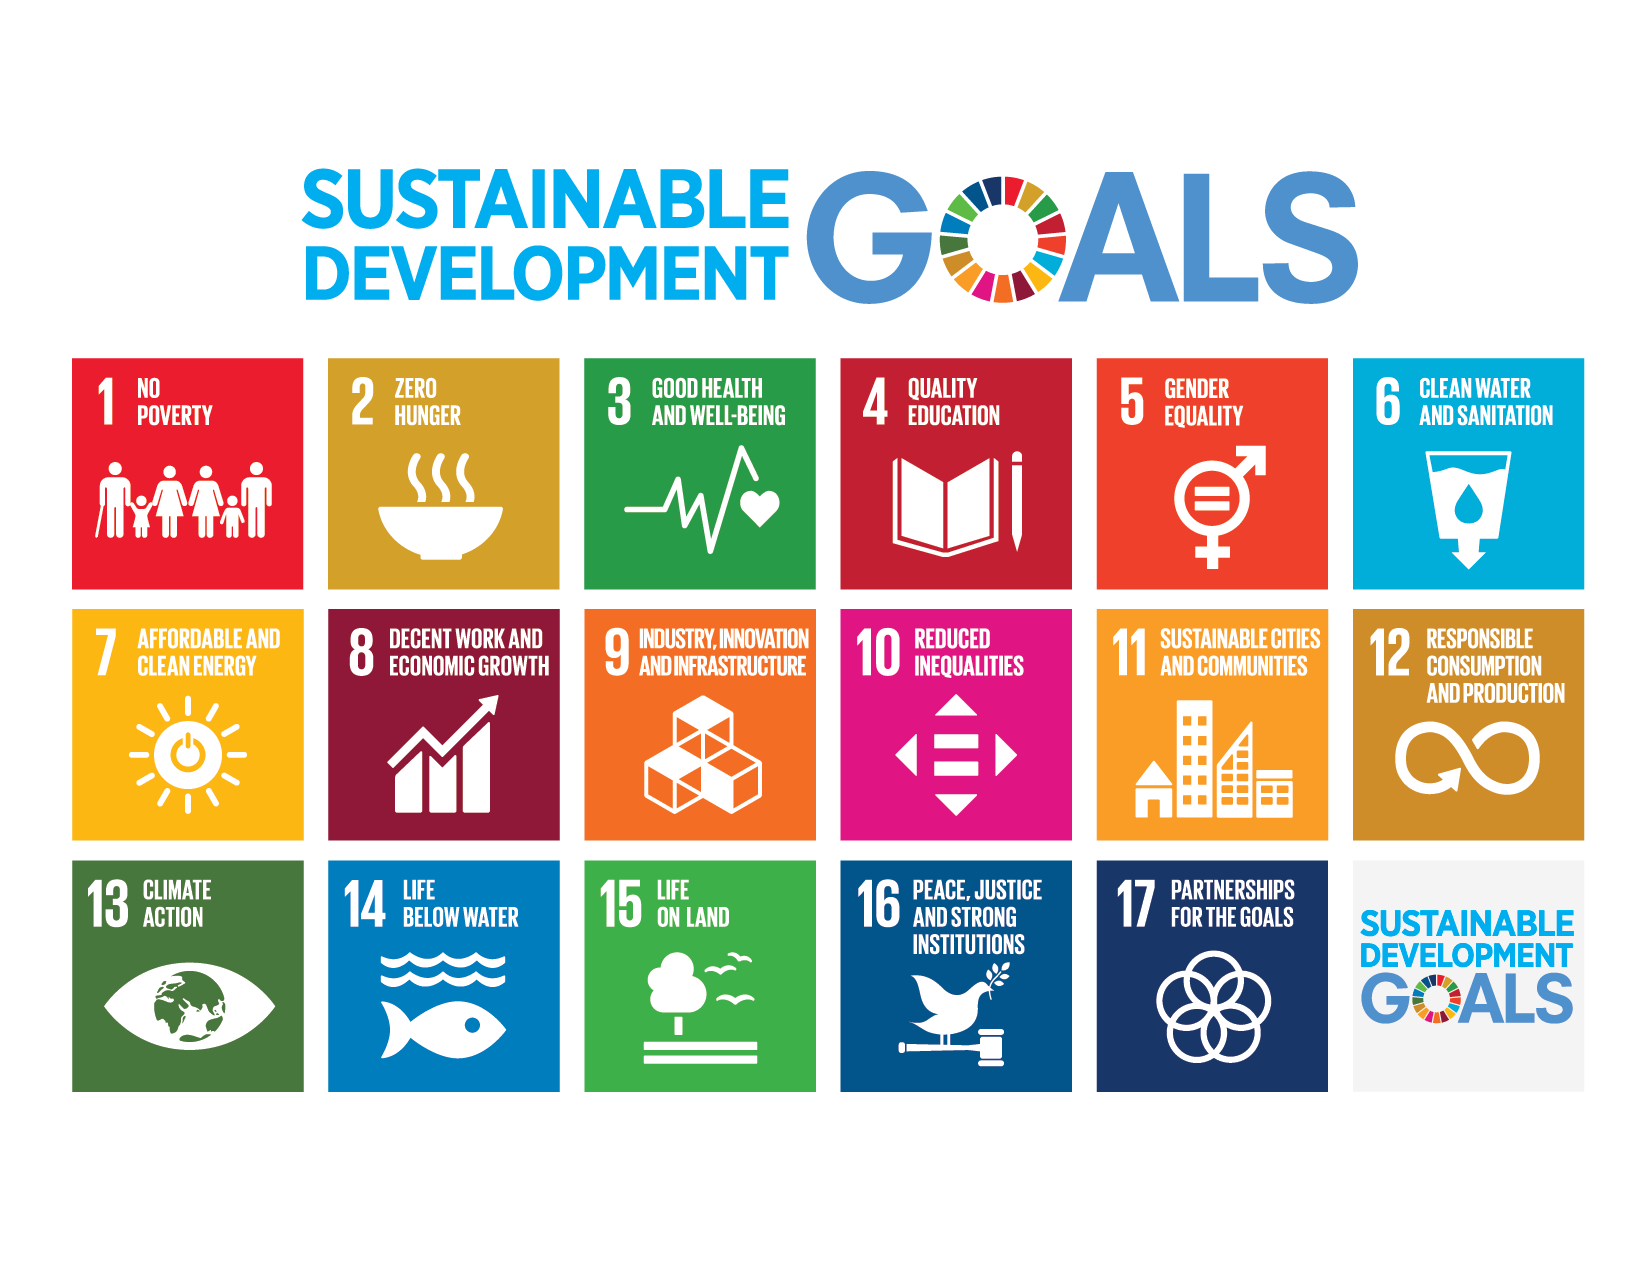 The 17 sustainable development goals (SDGs) to transform our world, as set by the United Nations General Assembly in 2015: GOAL 1: No Poverty; GOAL 2: Zero Hunger; GOAL 3: Good Health and Well-Being; GOAL 4: Quality Education; GOAL 5: Gender Equality; GOAL 6: Clean Water and Sanitation; GOAL 7: Affordable and Clean Energy; GOAL 8: Decent Work and Economic Growth; GOAL 9: Industry, Innovation, and Infrastructure; GOAL 10: Reduced Inequalities; GOAL 11: Sustainable Cities and Communities; GOAL 12: Responsible Consumption and Production; GOAL 13: Climate Action; GOAL 14: Life Below Water; GOAL 15: Life on Land; GOAL 16: Peace, Justice, and Strong Institutions; GOAL 17: Partnerships for the Goals. Image: United Nations.